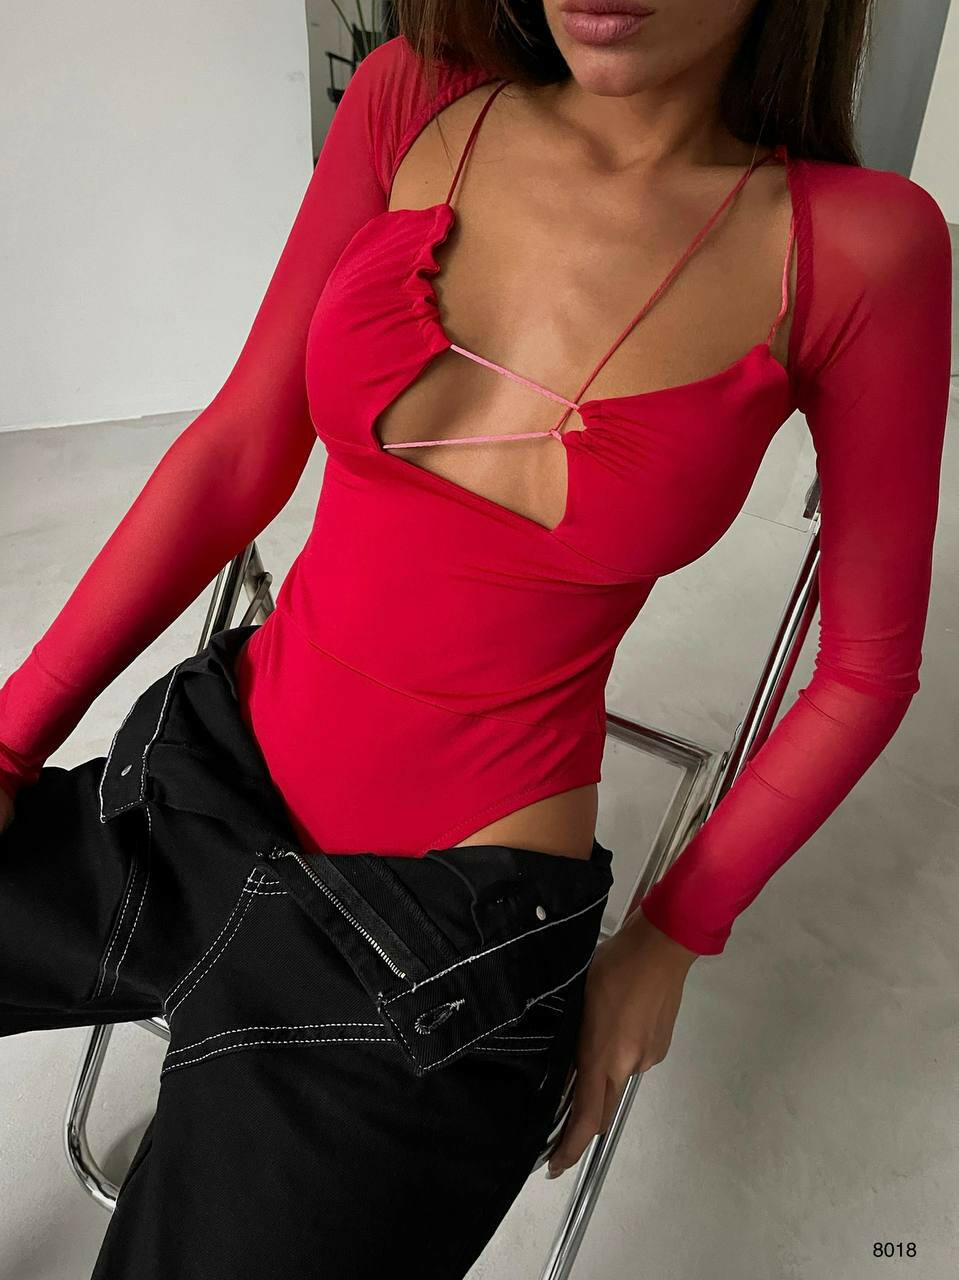  Plunging Neckline with Sheer Sleeves Bodysuit - Red